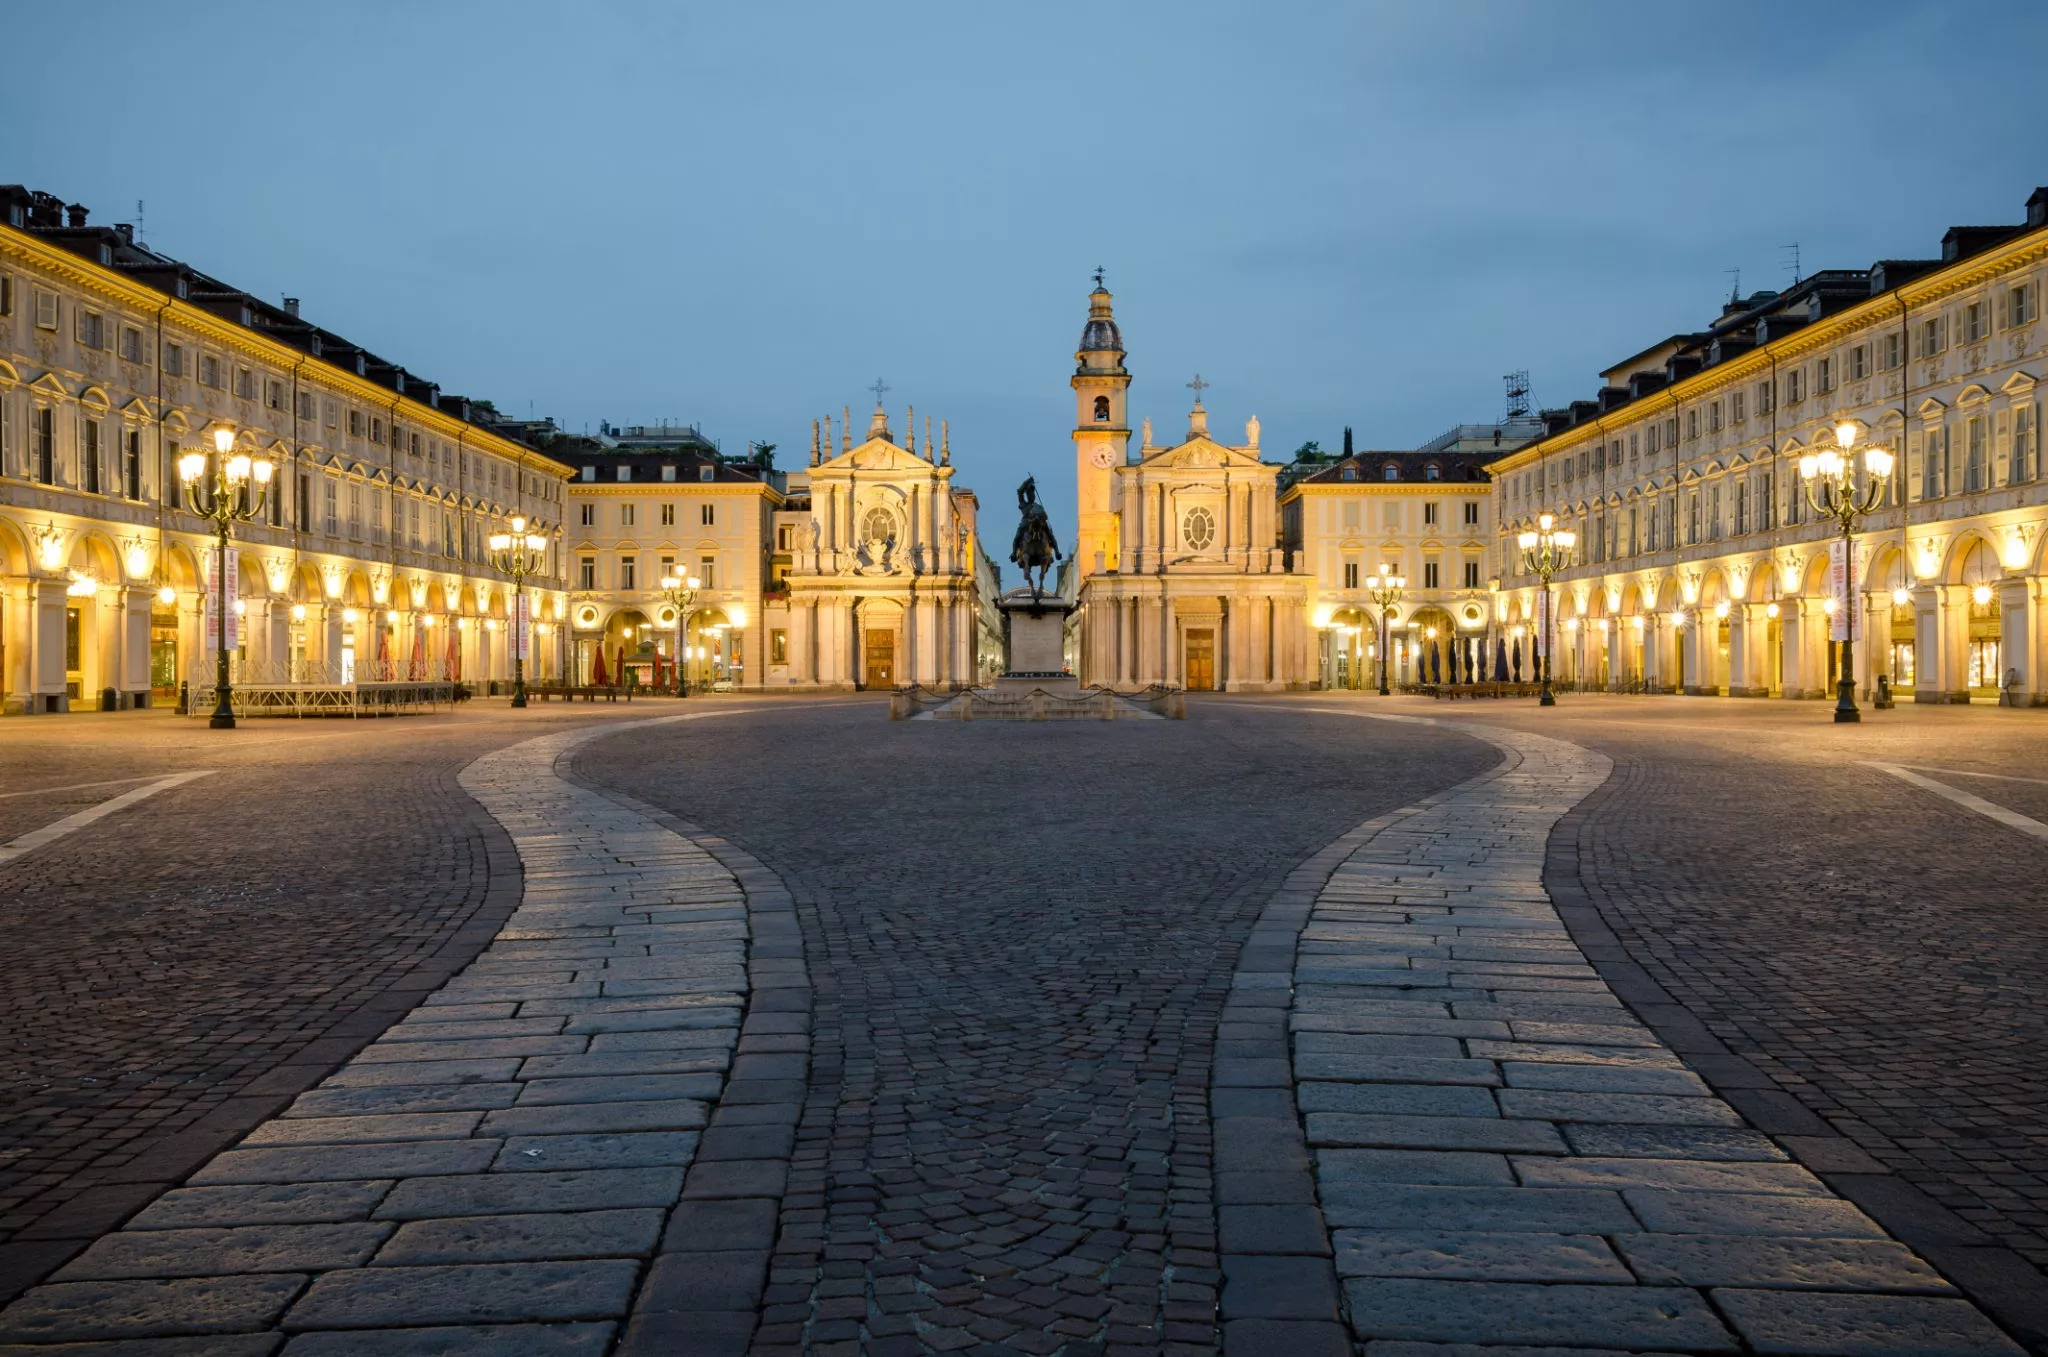 Piazza San Carlo in Italy, Europe | Architecture - Rated 4.1